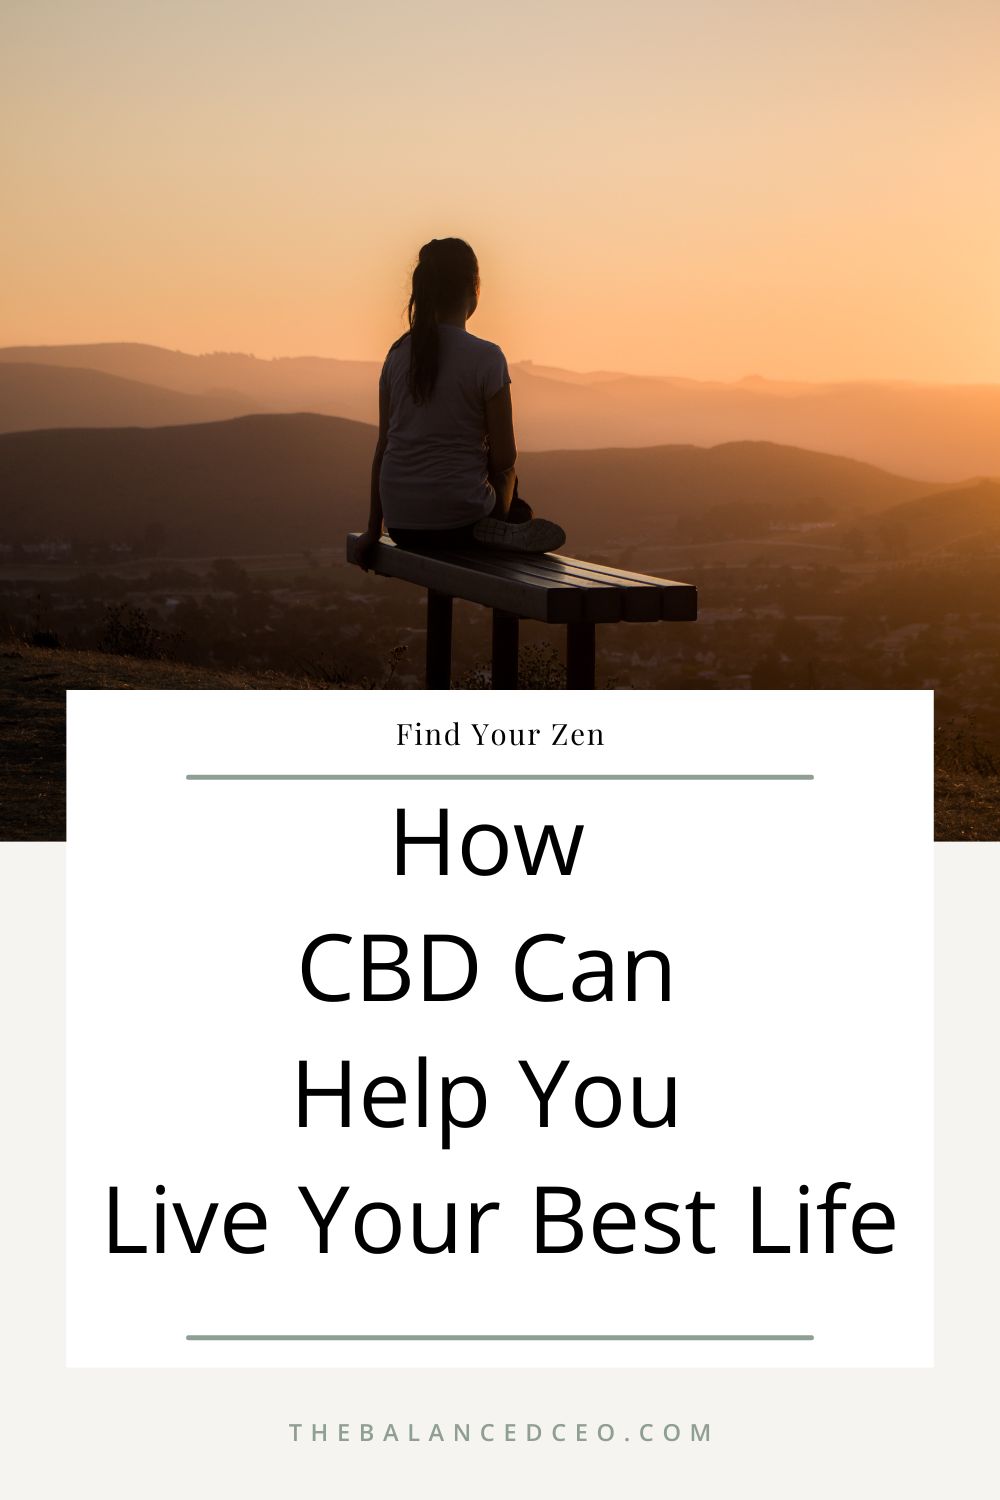 Find Your Zen: How CBD Can Help You Live Your Best Life